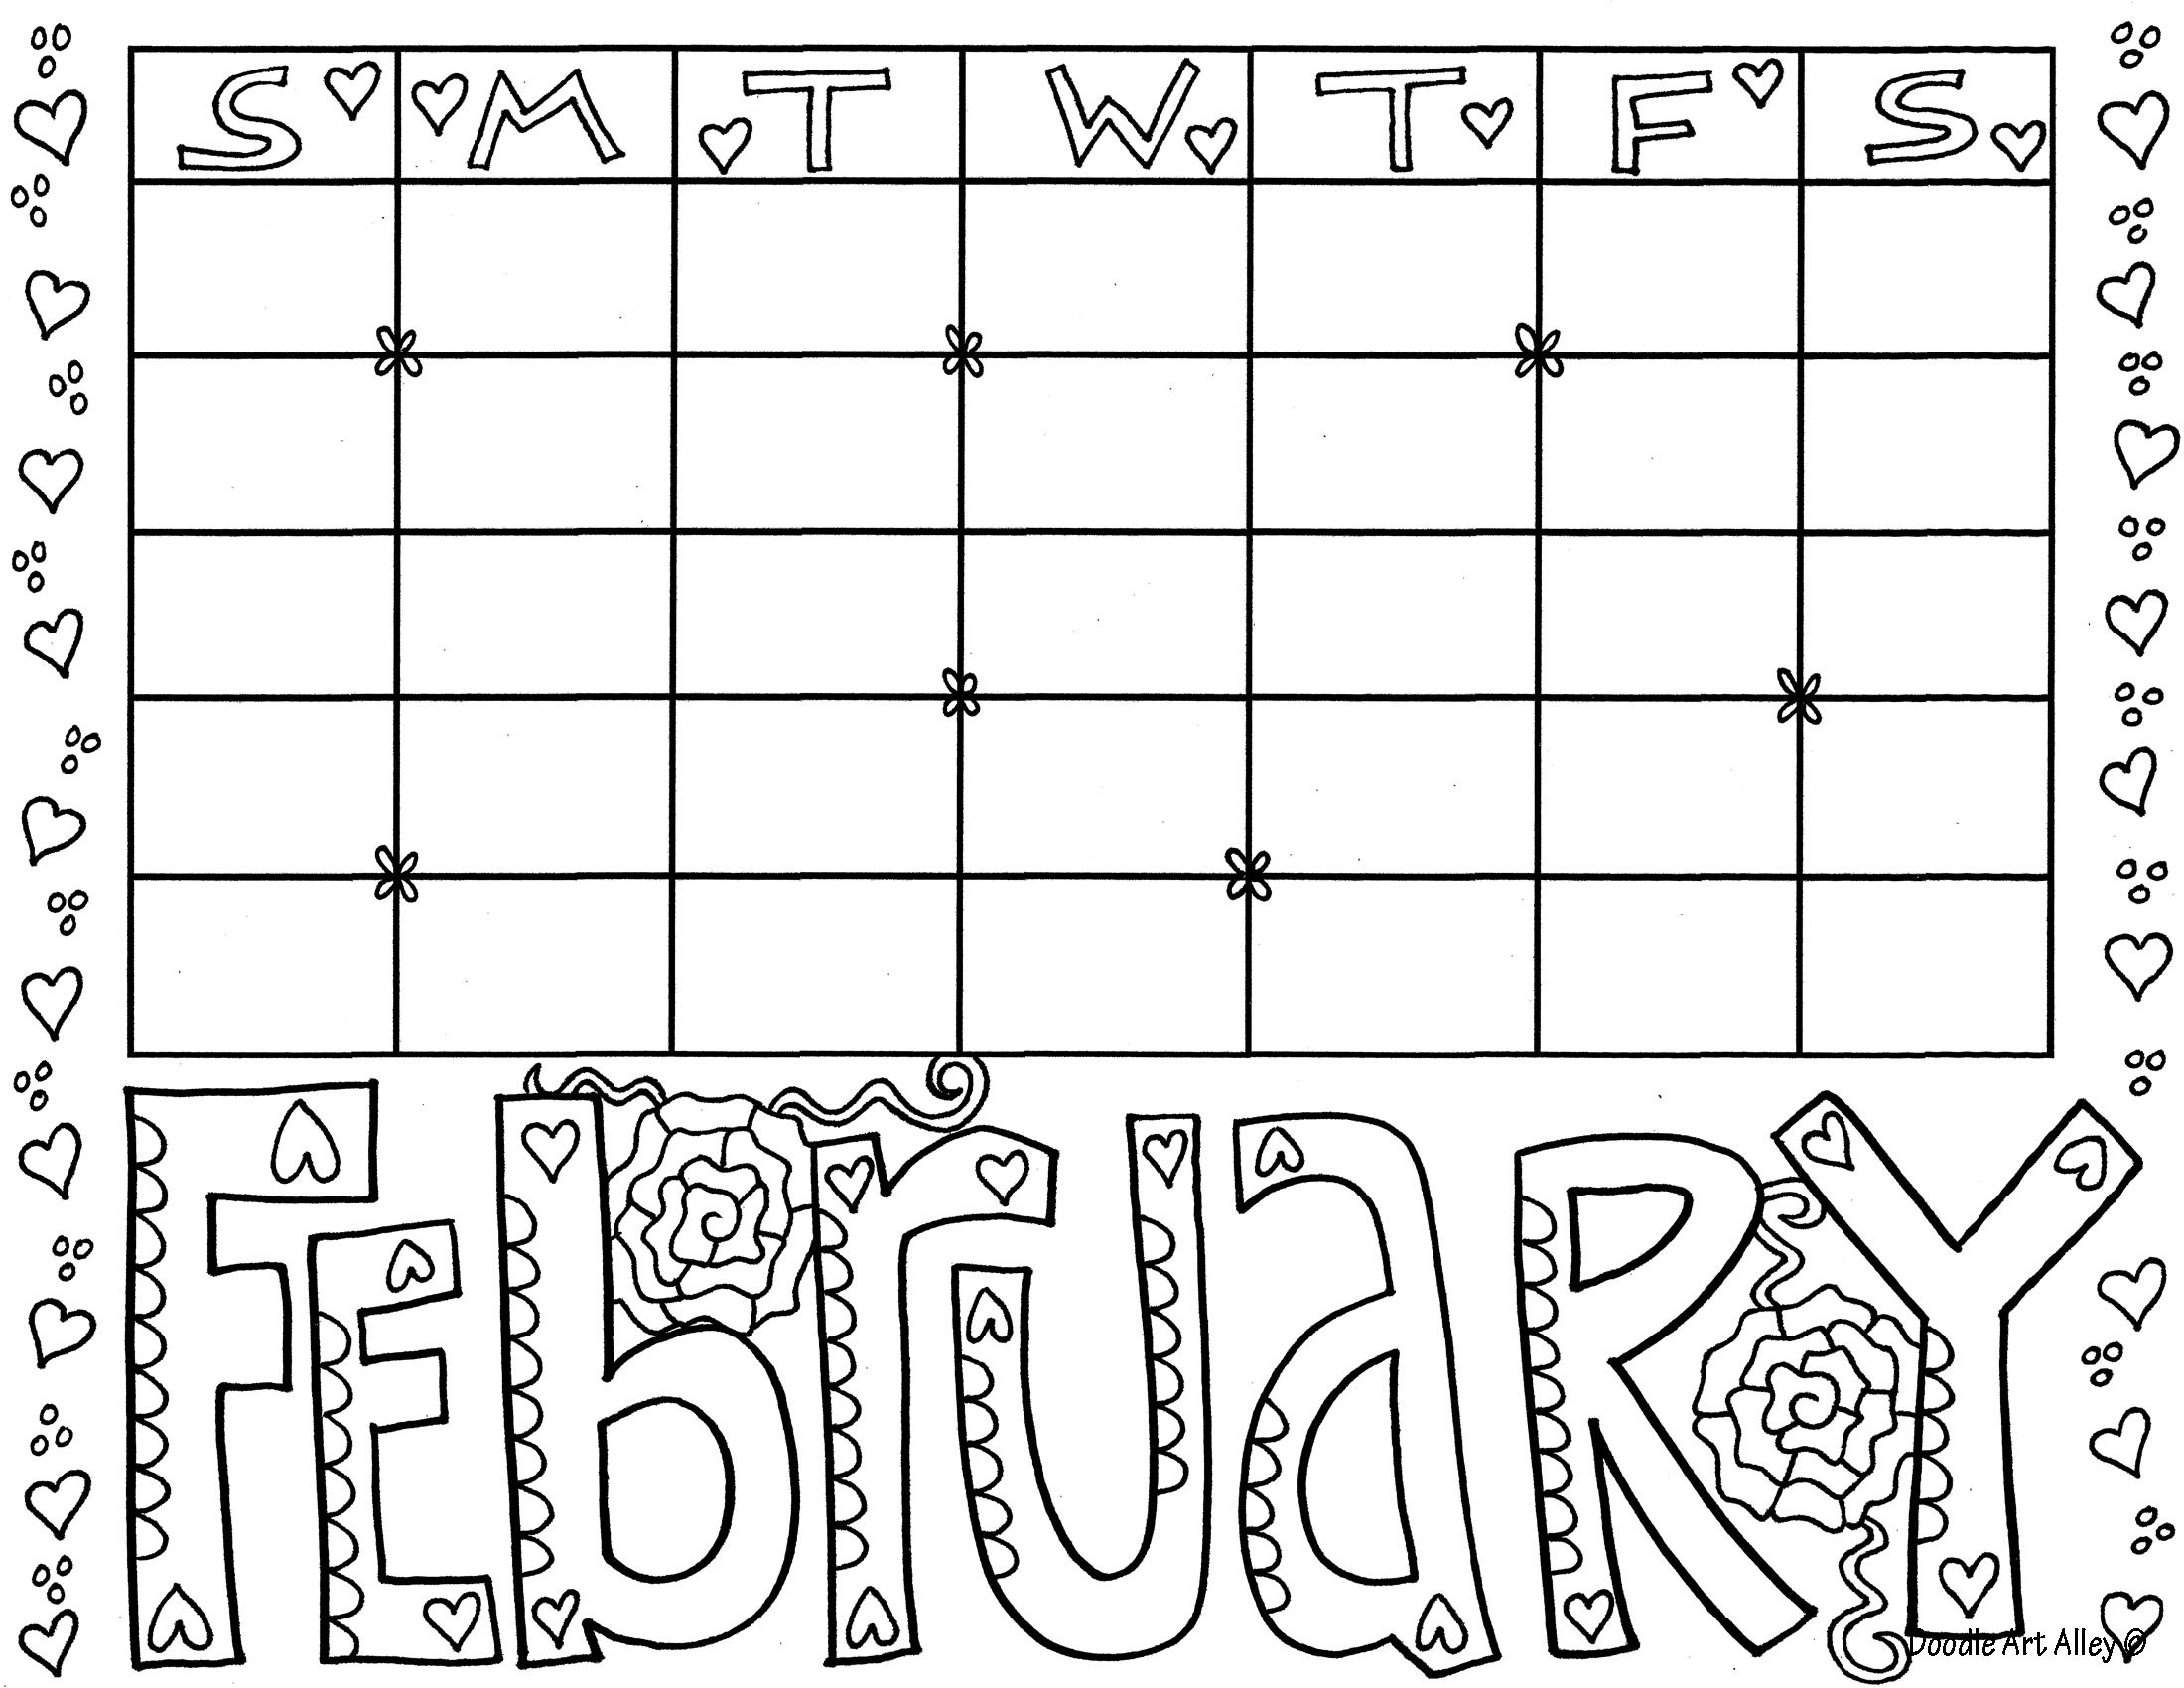 February Coloring Pages - DOODLE ART ALLEY